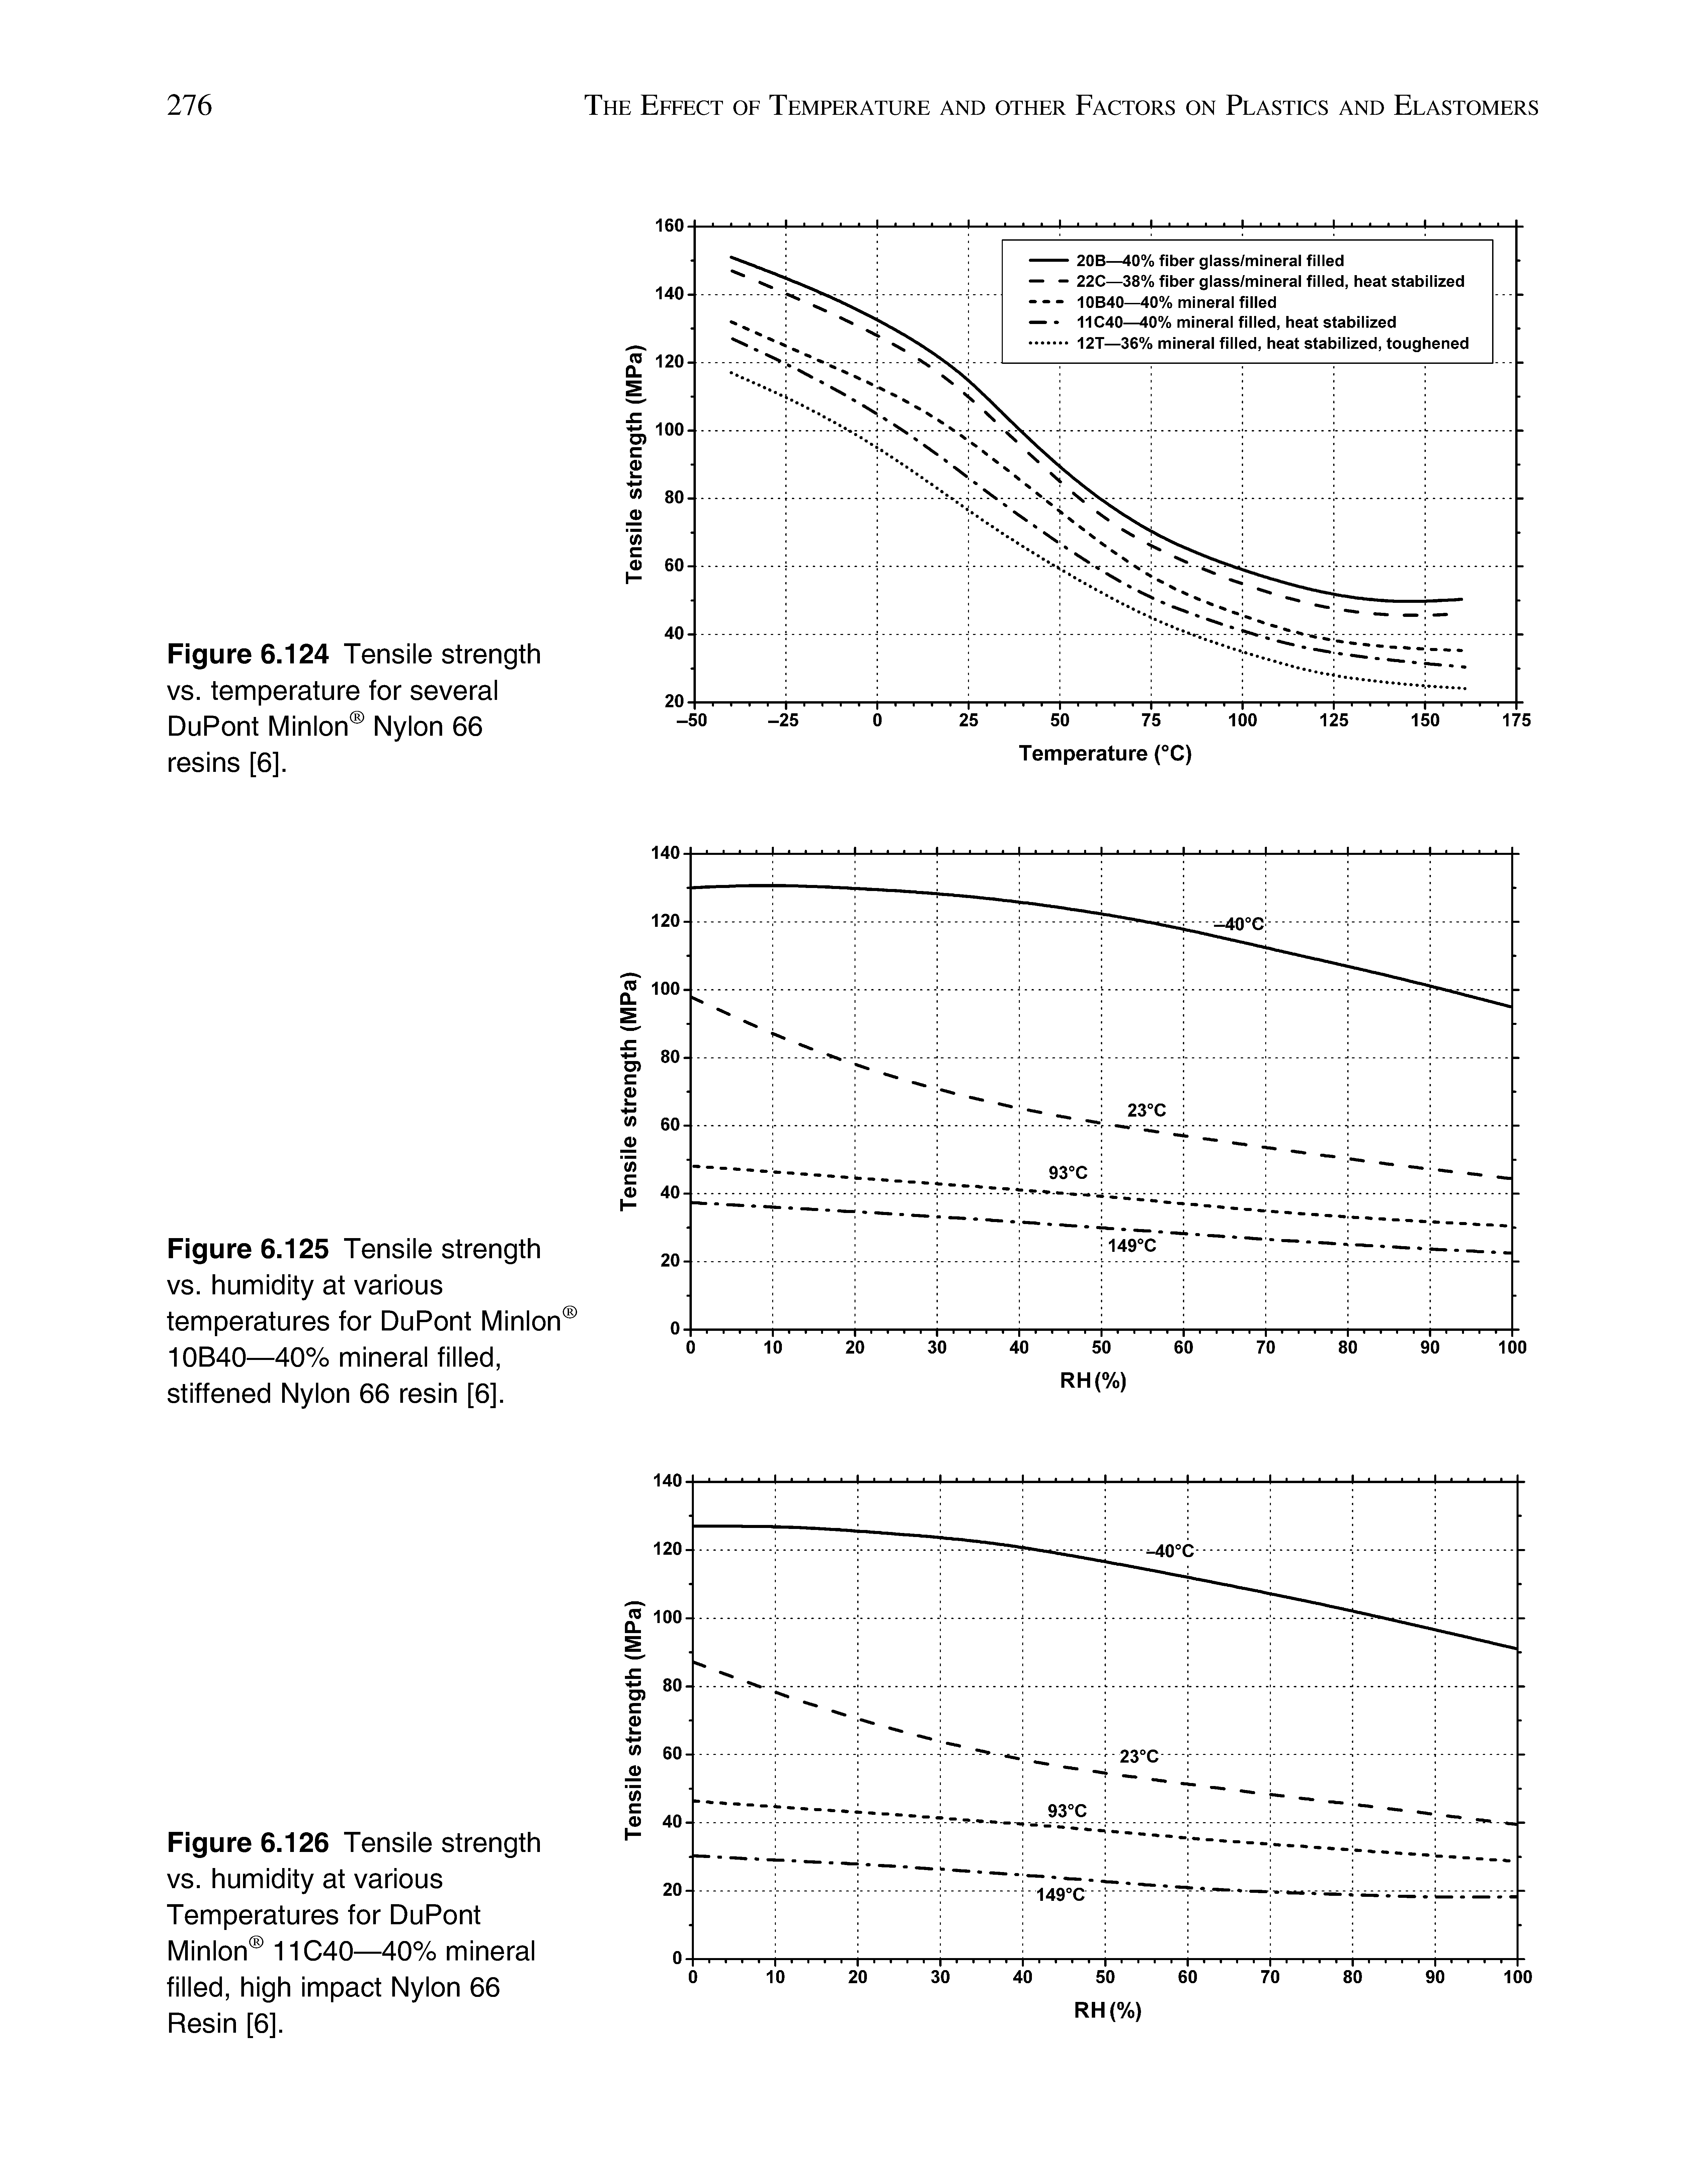 Figure 6.125 Tensile strength vs. humidity at various temperatures for DuPont Minion 10B40—40% mineral filled, stiffened Nylon 66 resin [6].